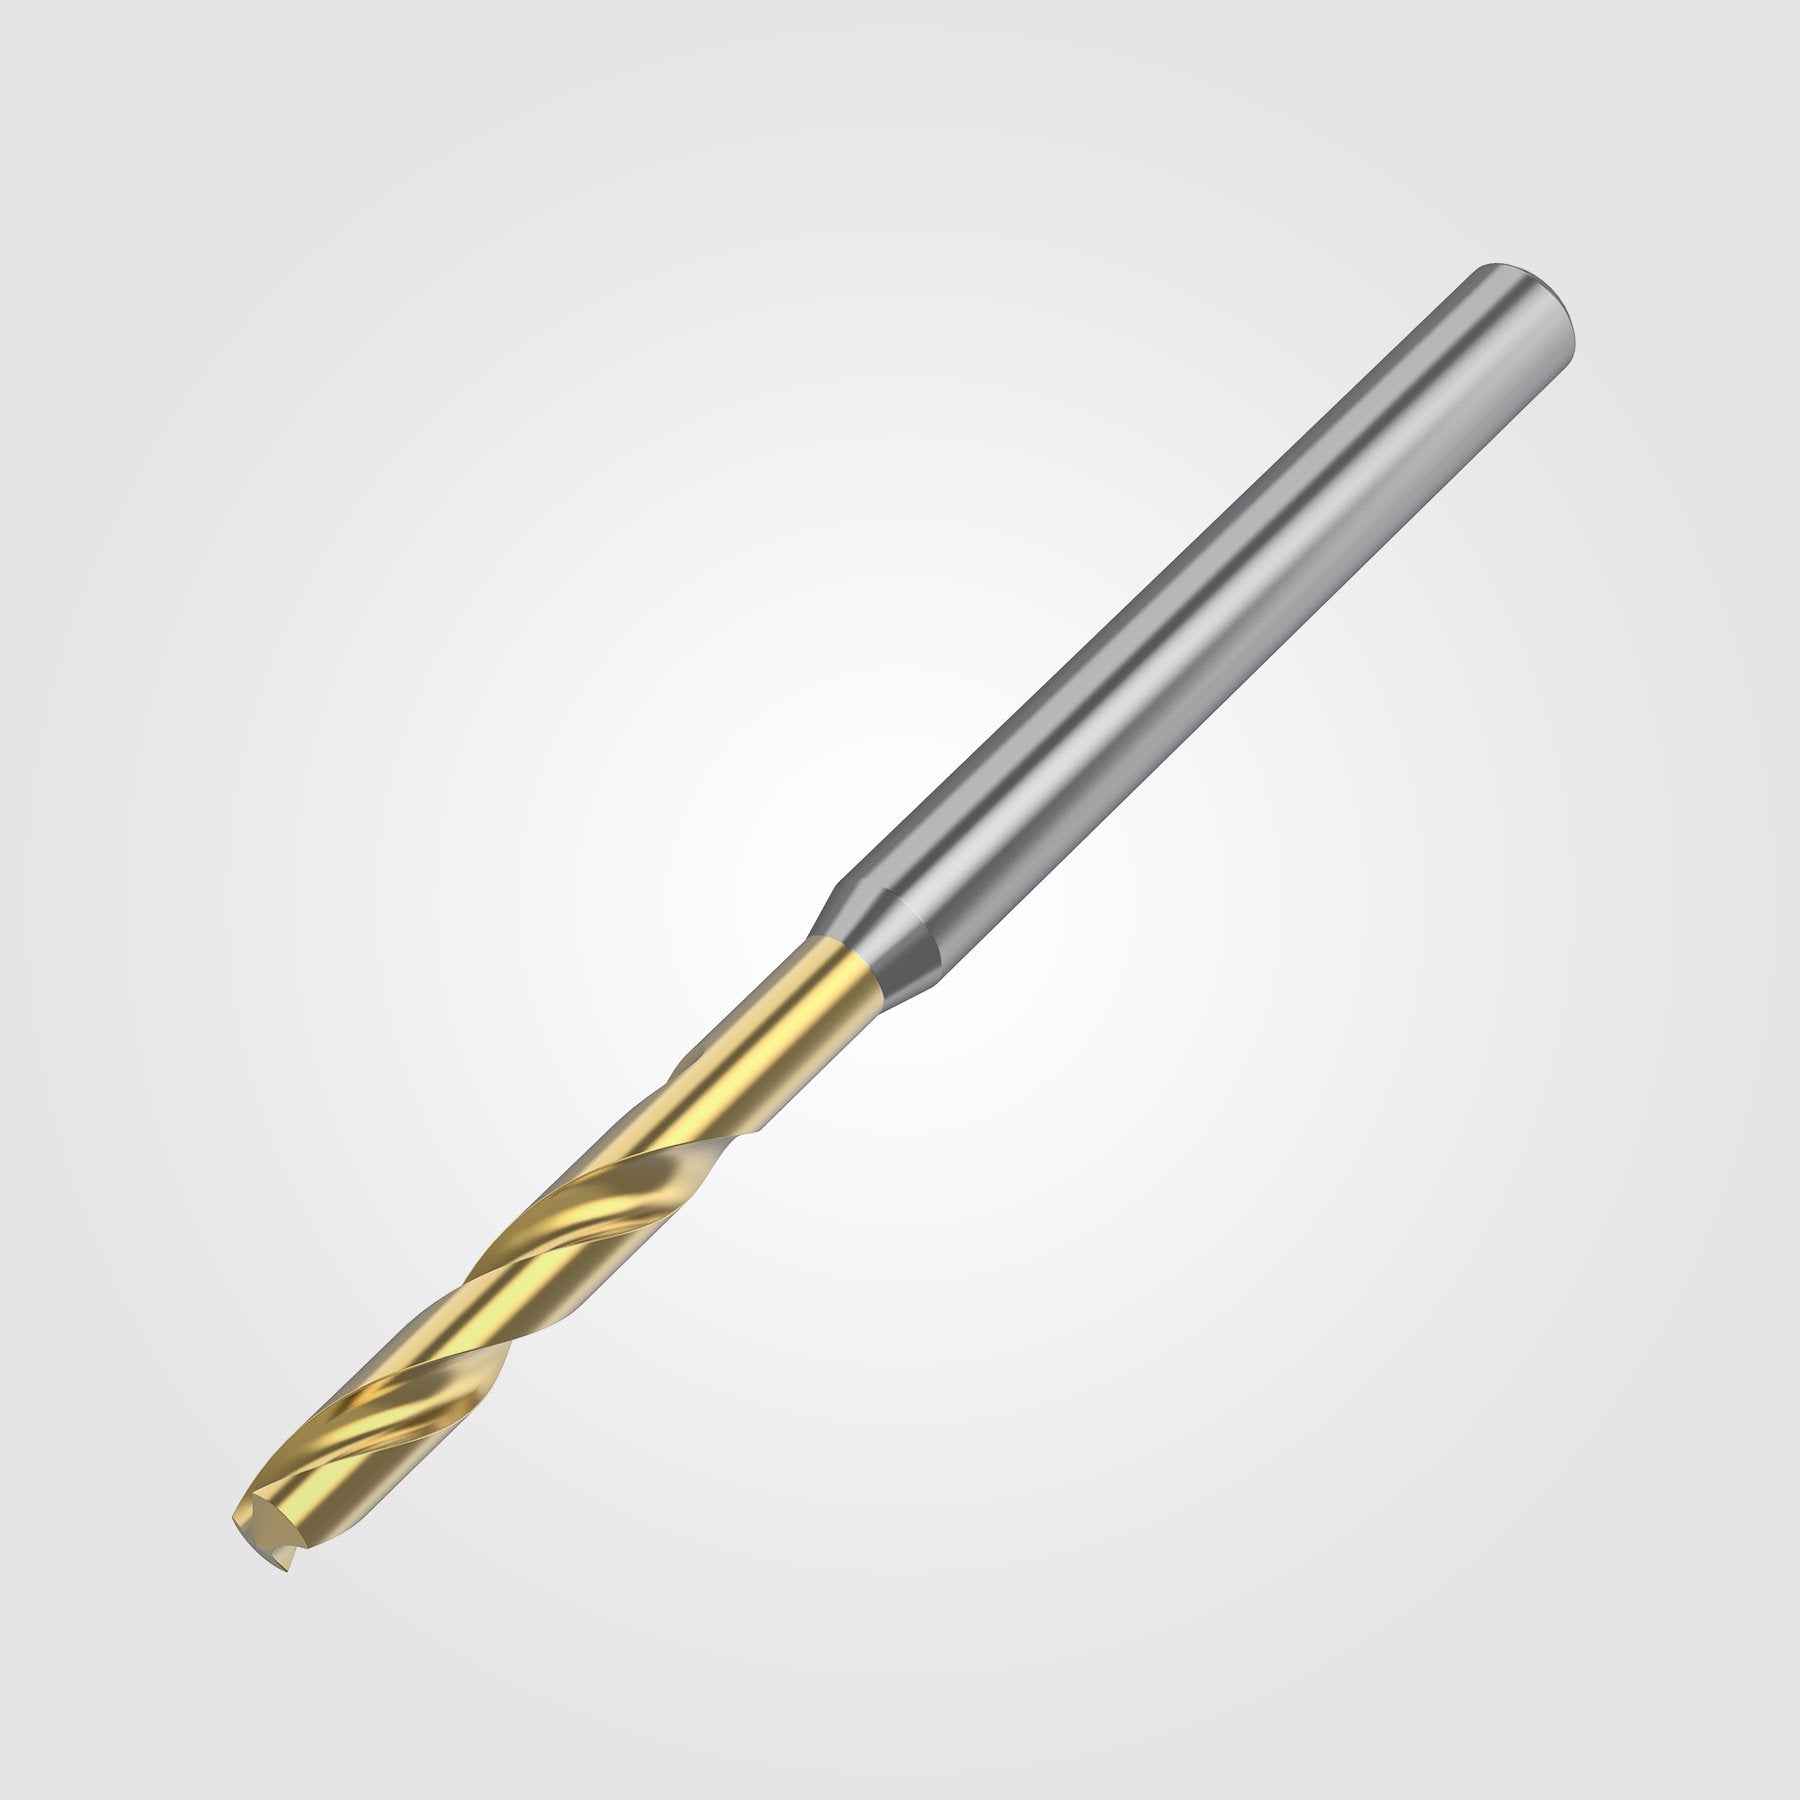 GOdrill (THROUGH COOLANT) | 3.175mm / .1250" / 3xD | SOLID CARBIDE DRILL | 4151104